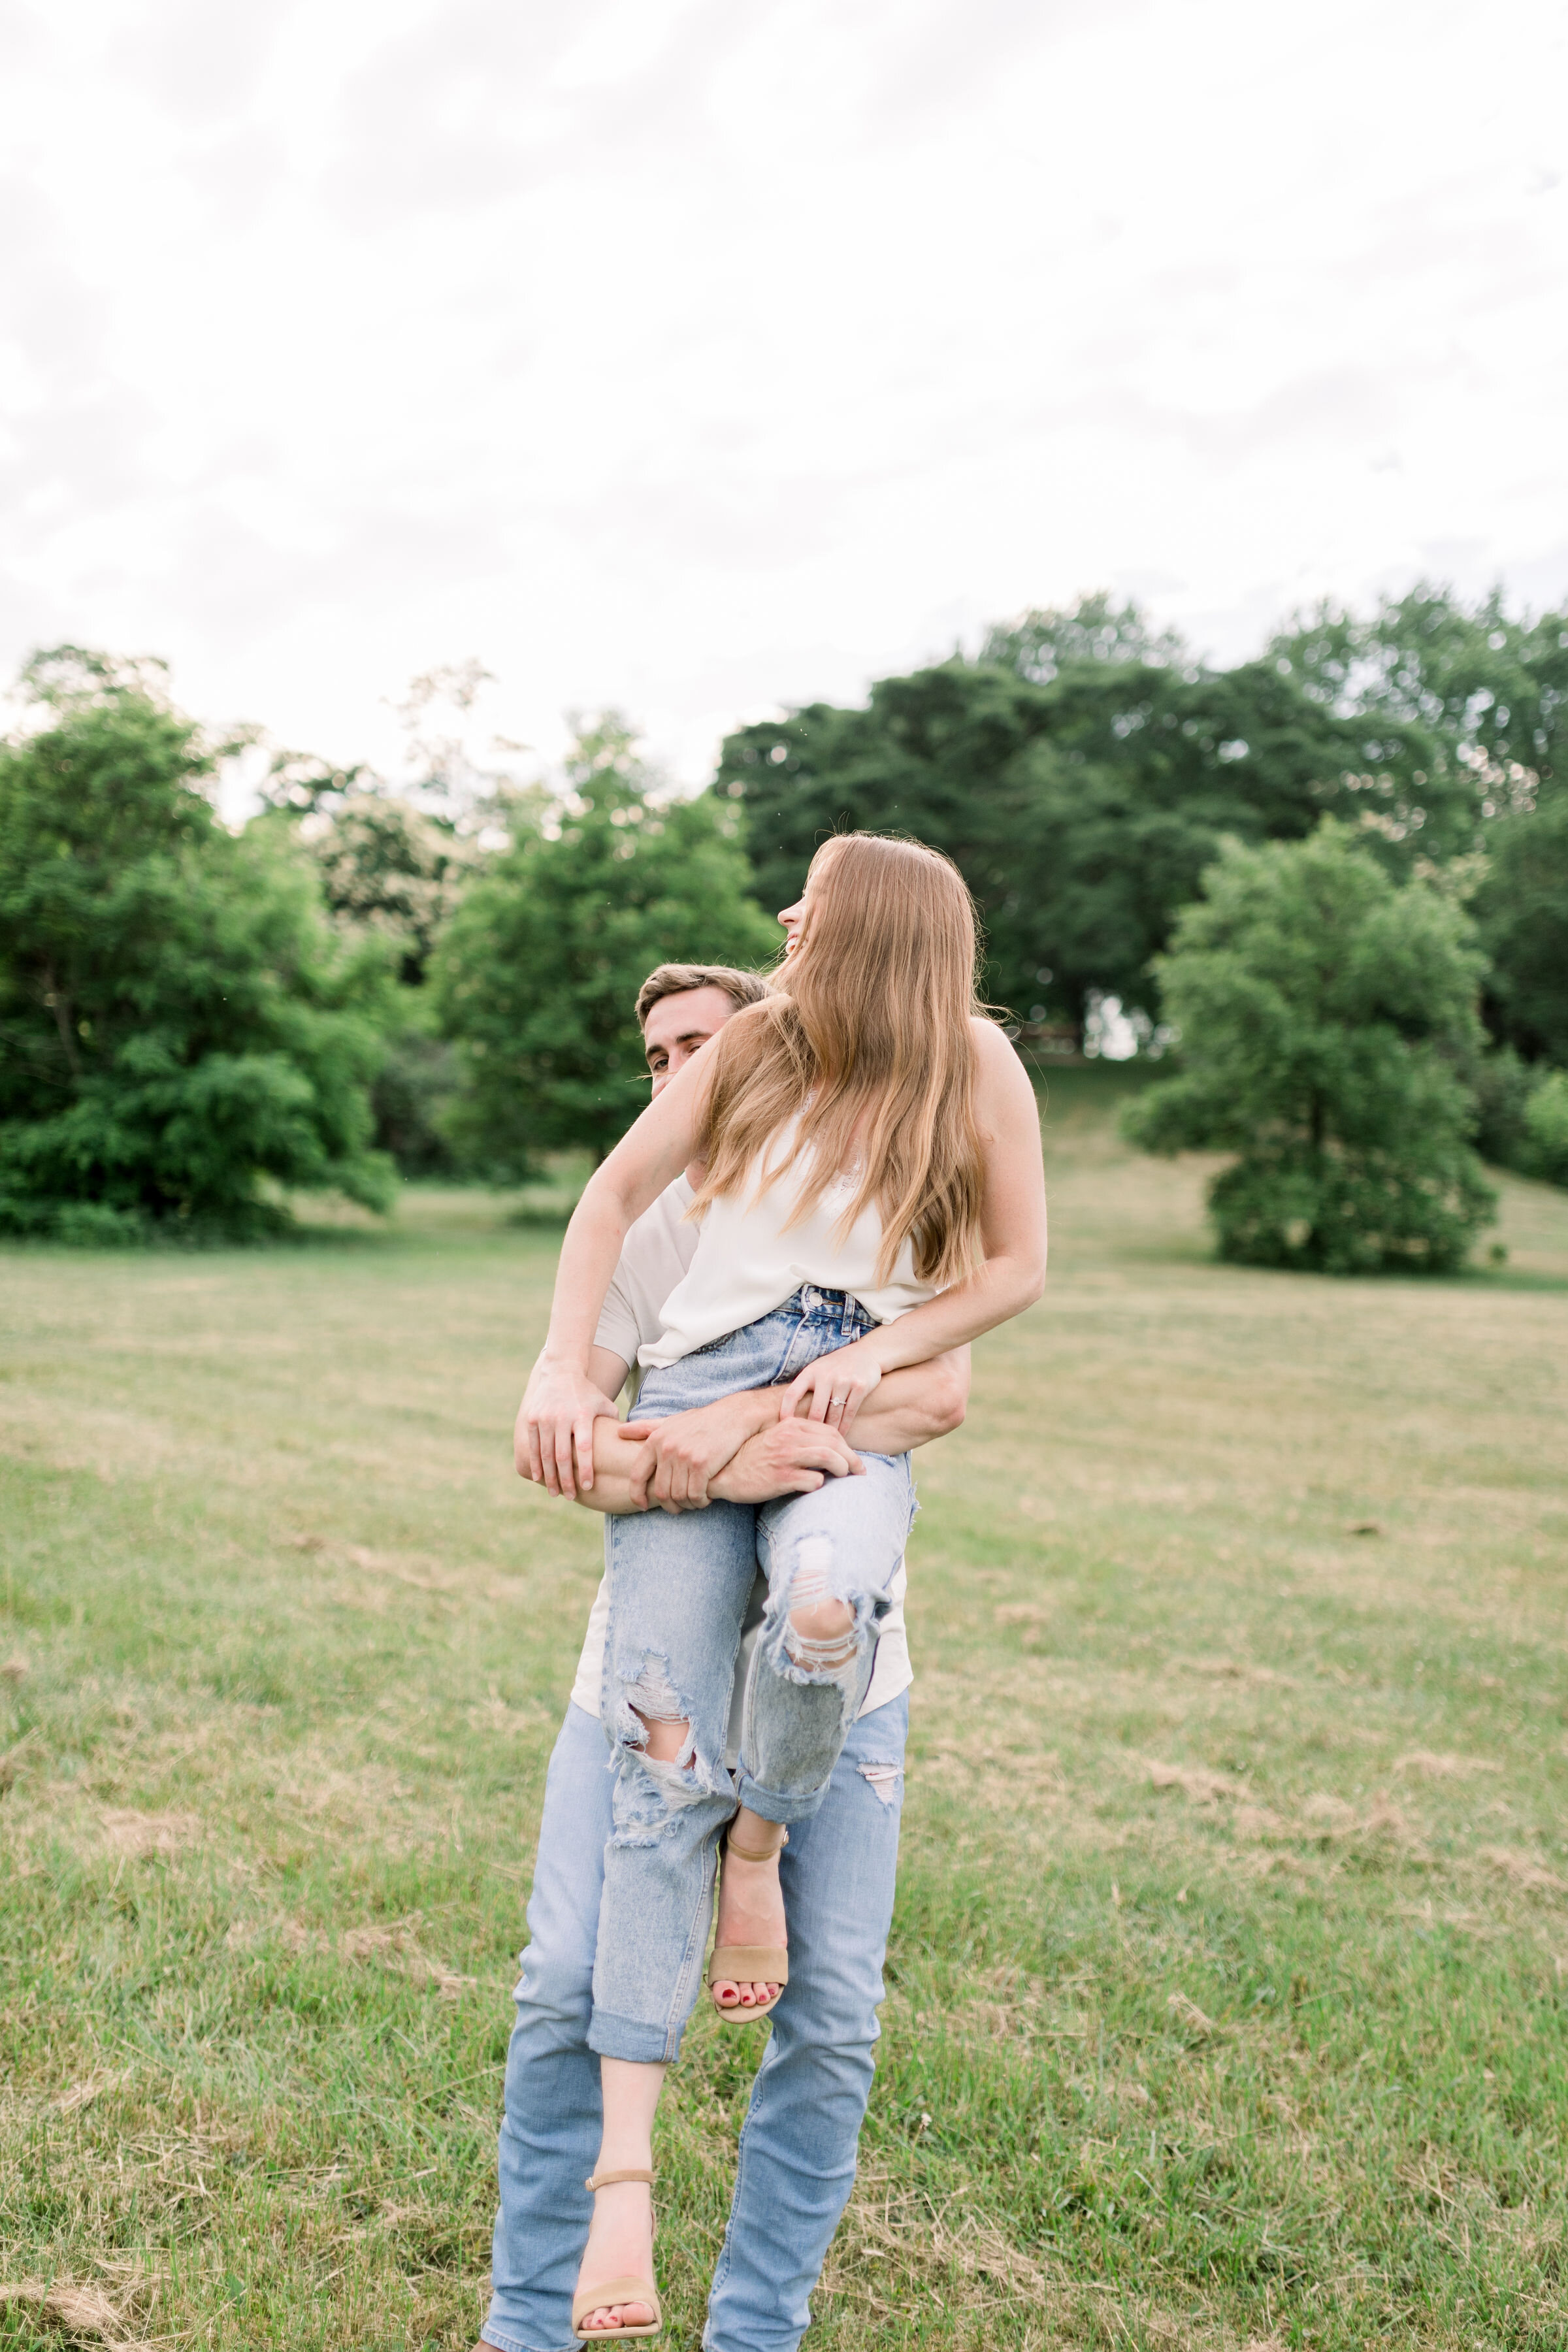  During this playful engagement session, Ottawa, Ontario photographer, Chelsea Mason Photography captures this soon-to-be groom picking up his fiancé playfully. groom picking up fiancé playful couples poses Ottawa engagement photographer #ChelseaMaso